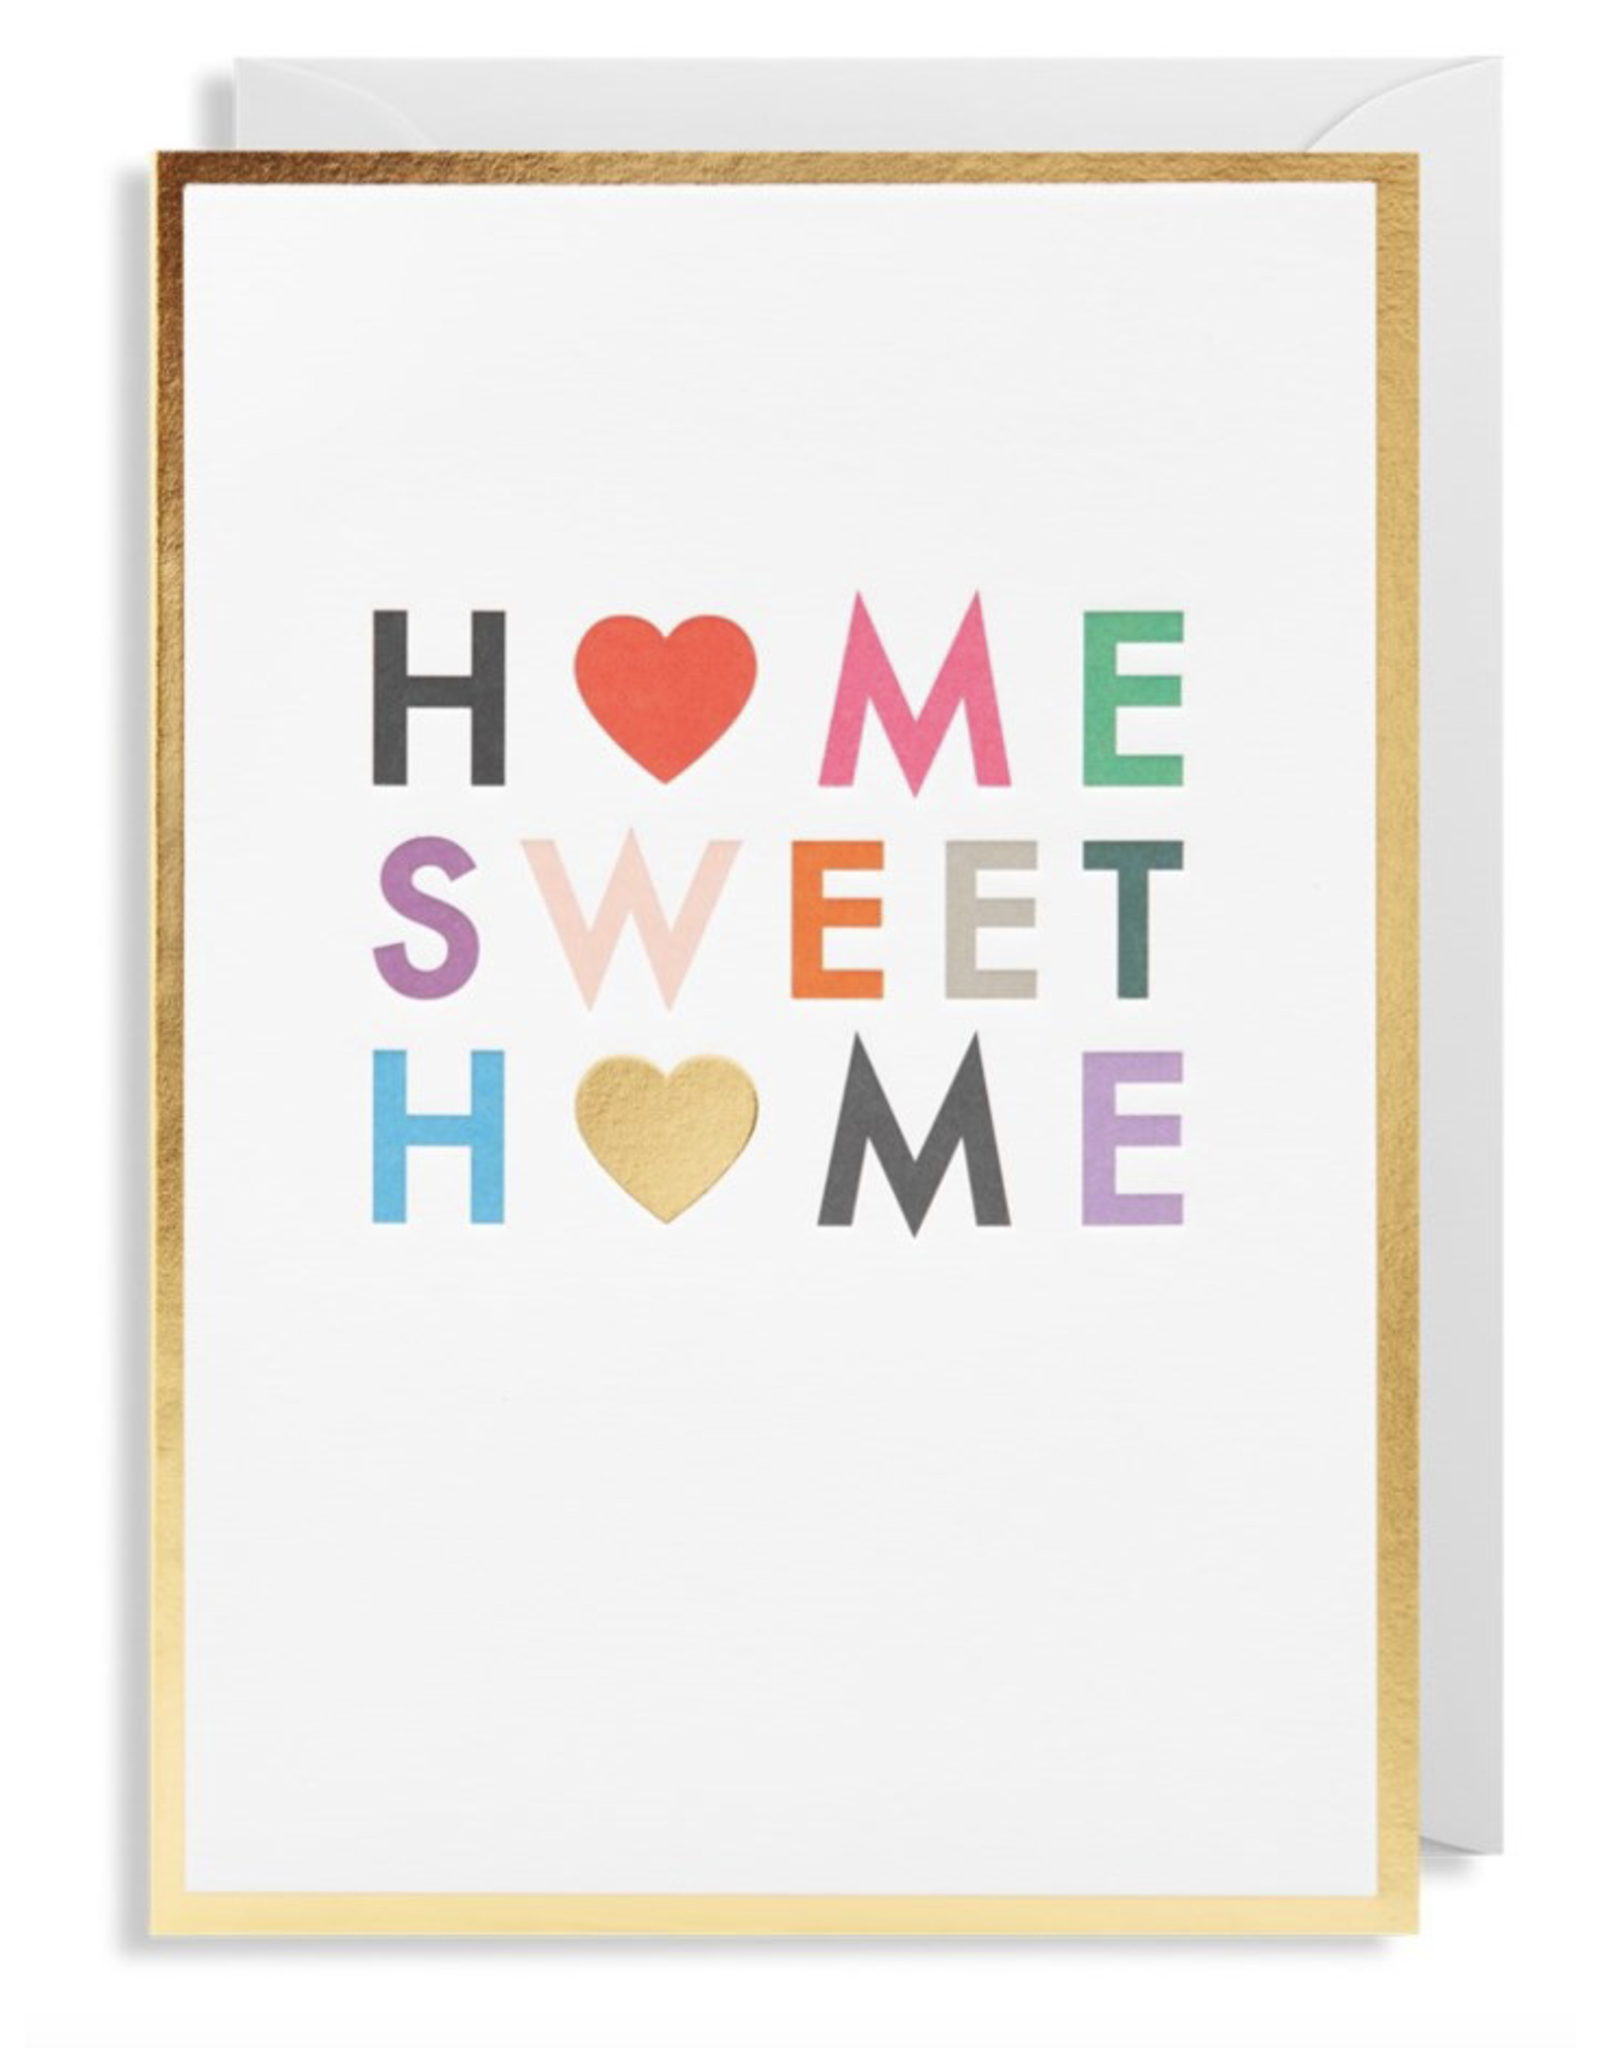 New Home- Home Sweet Home Hearts